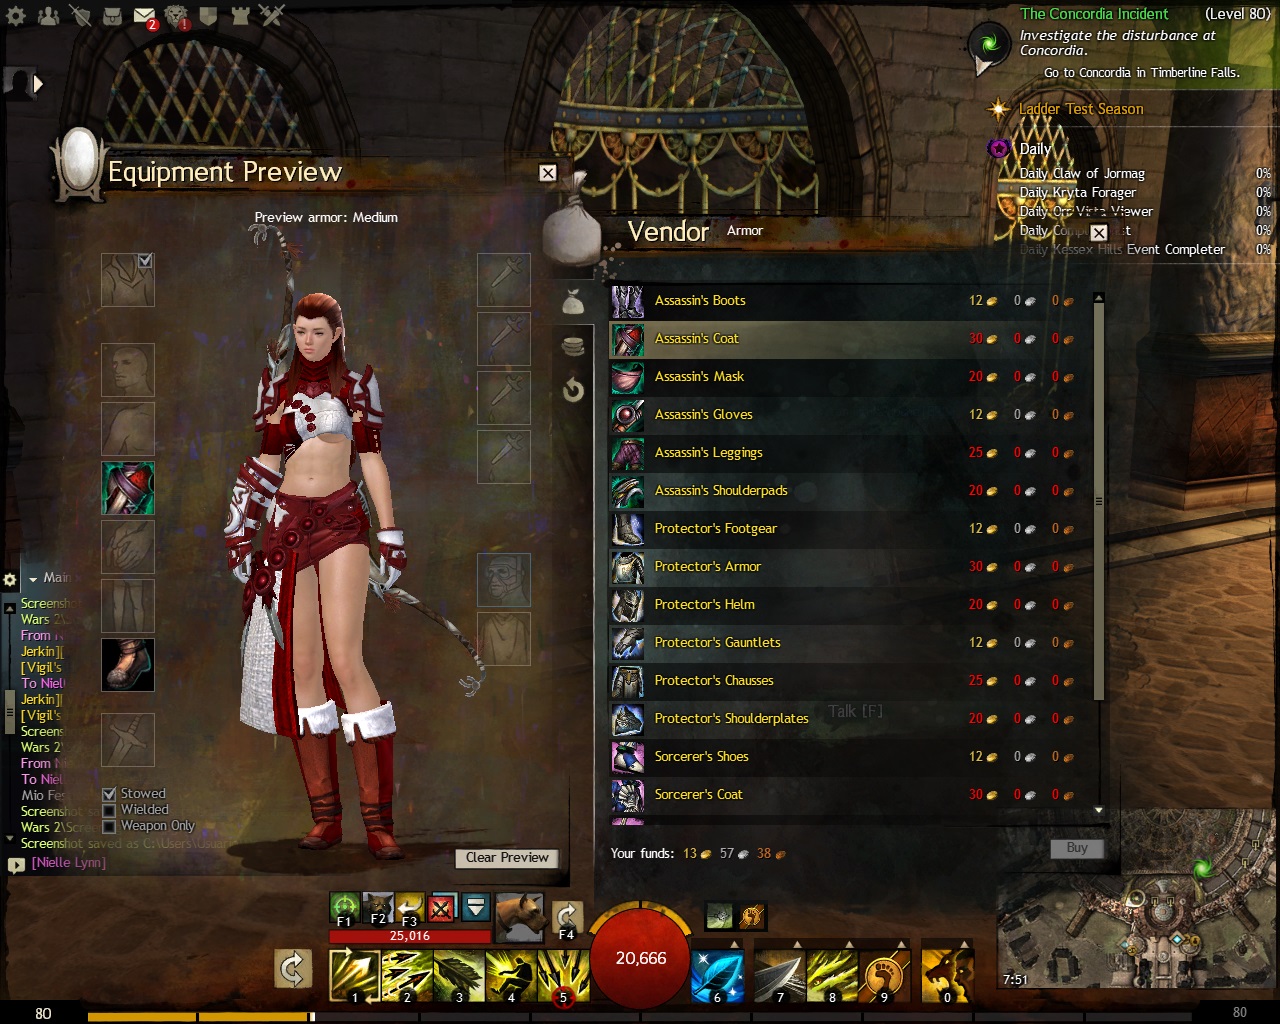 Guild Wars 2 - Assassin's Coat with Skirt and Seeker Boots - 03